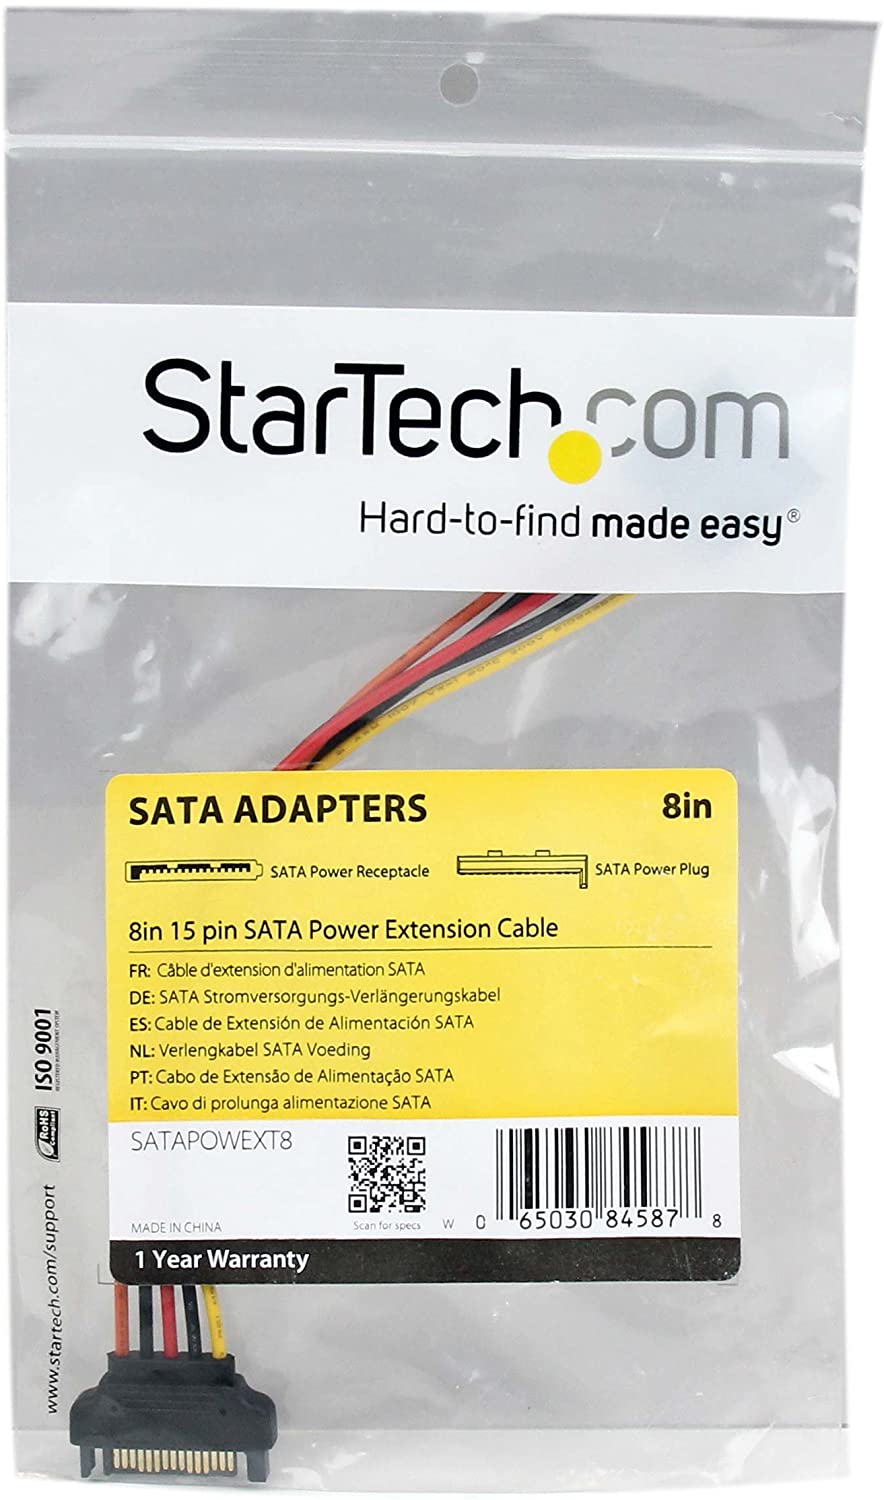 StarTech.com 8in 15 pin SATA Power Extension Cable - 8 SATA power Extension Cable - 8 SATA power Extension cord (SATAPOWEXT8) 8 Inch